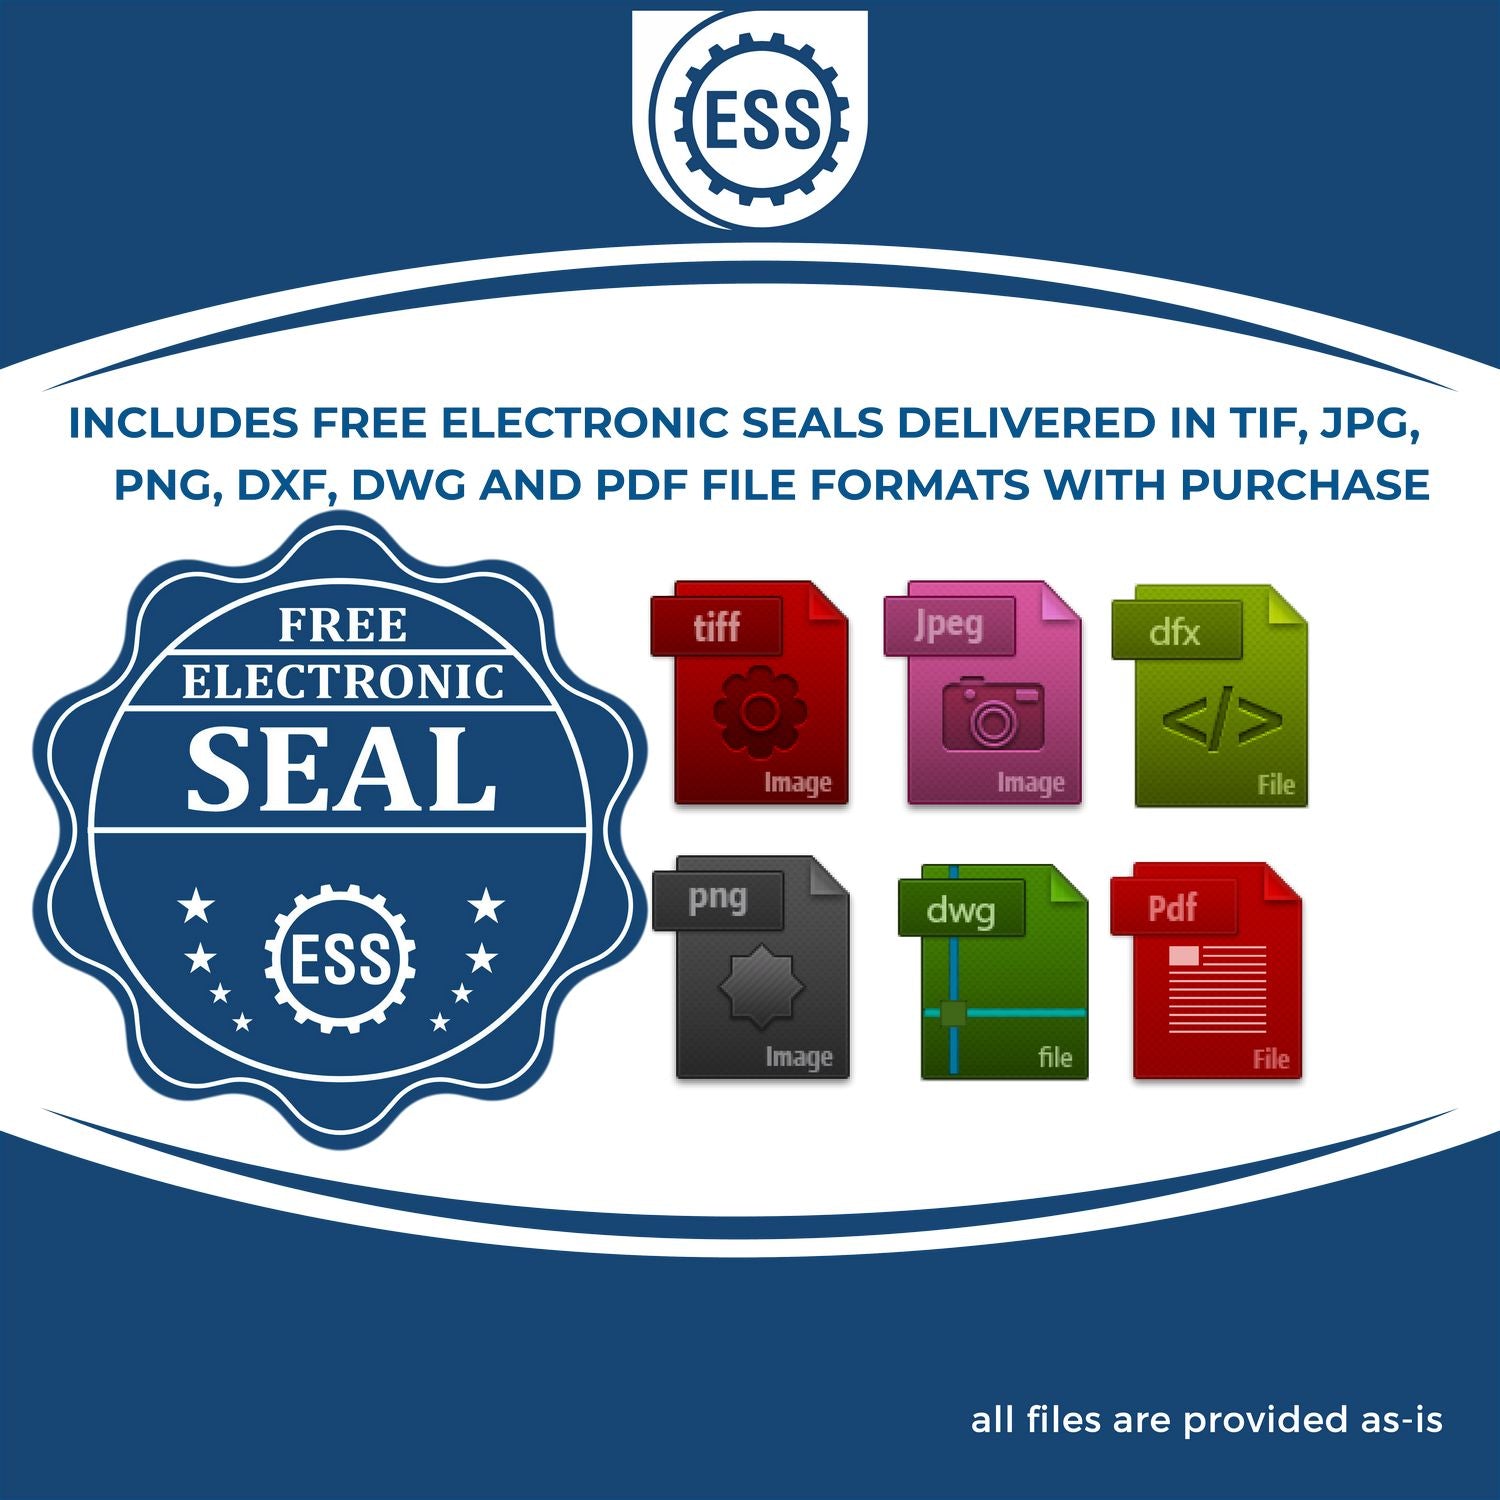 An infographic for the free electronic seal for the Self-Inking Delaware Landscape Architect Stamp illustrating the different file type icons such as DXF, DWG, TIF, JPG and PNG.